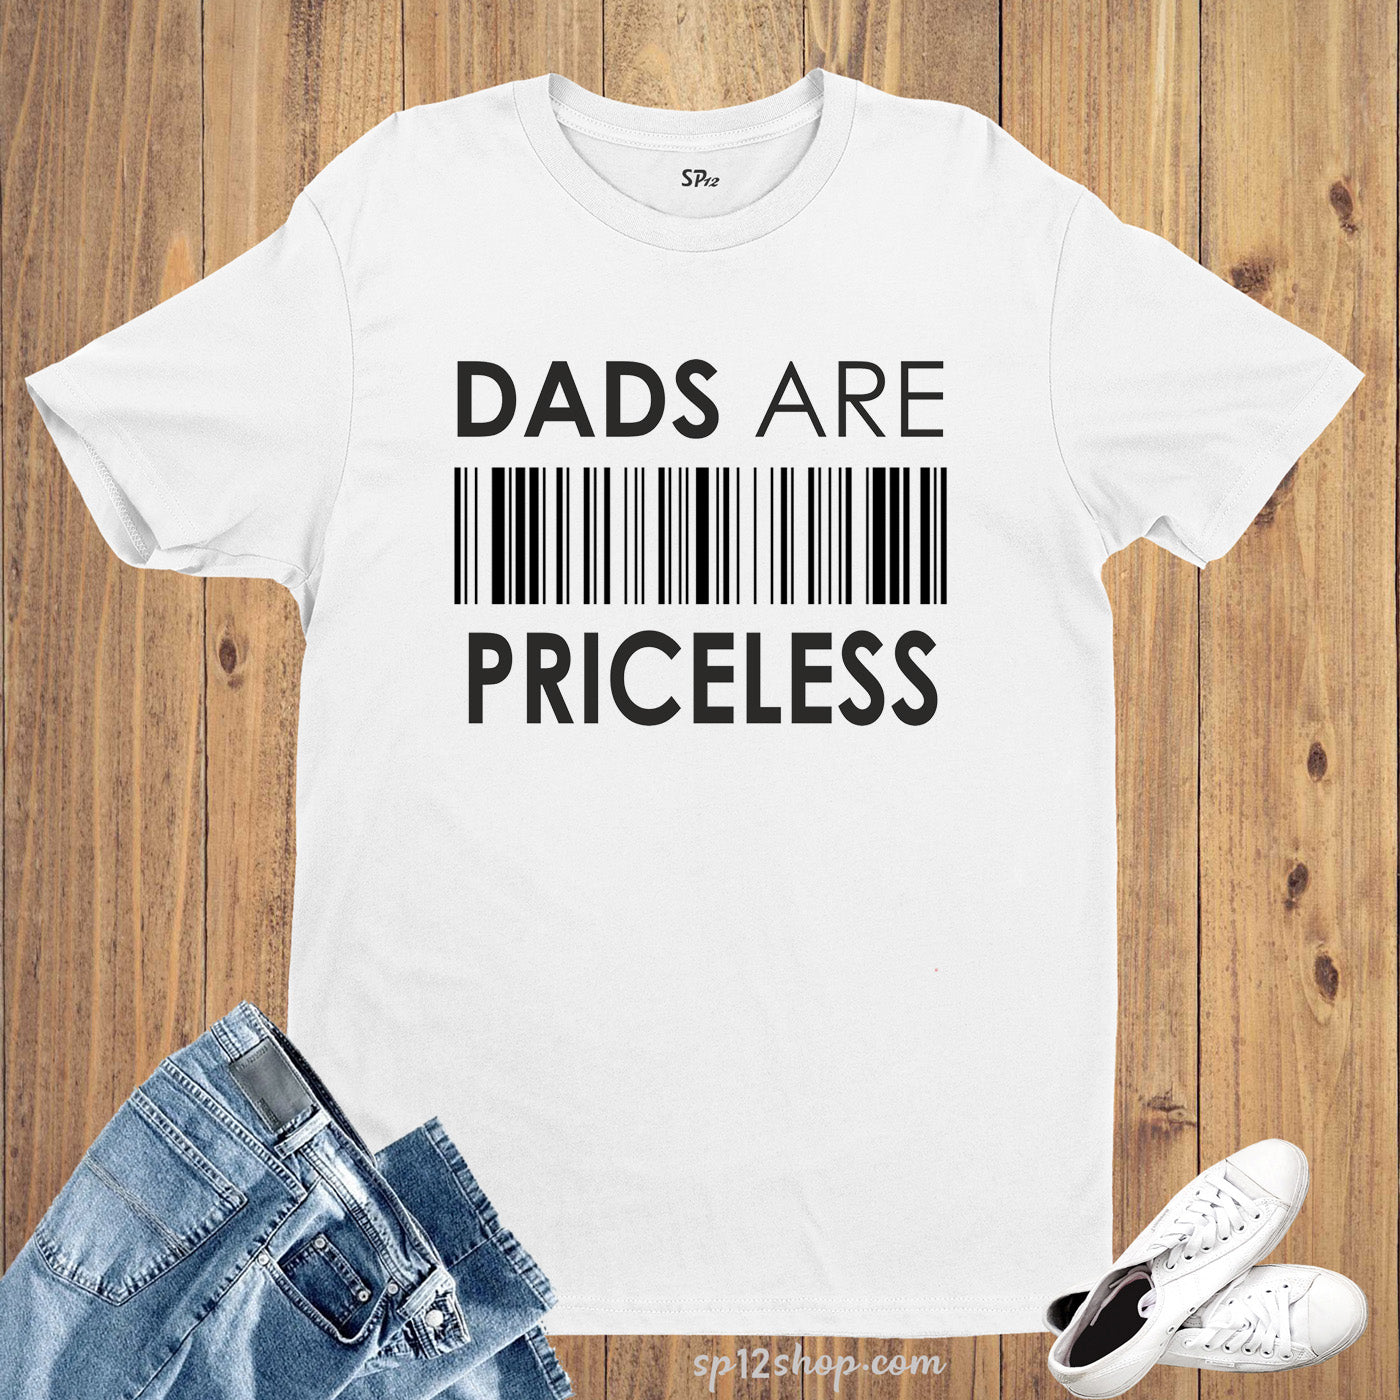 Family Fathers Day Gift T Shirt Dads Are Priceless t-shirt Tee